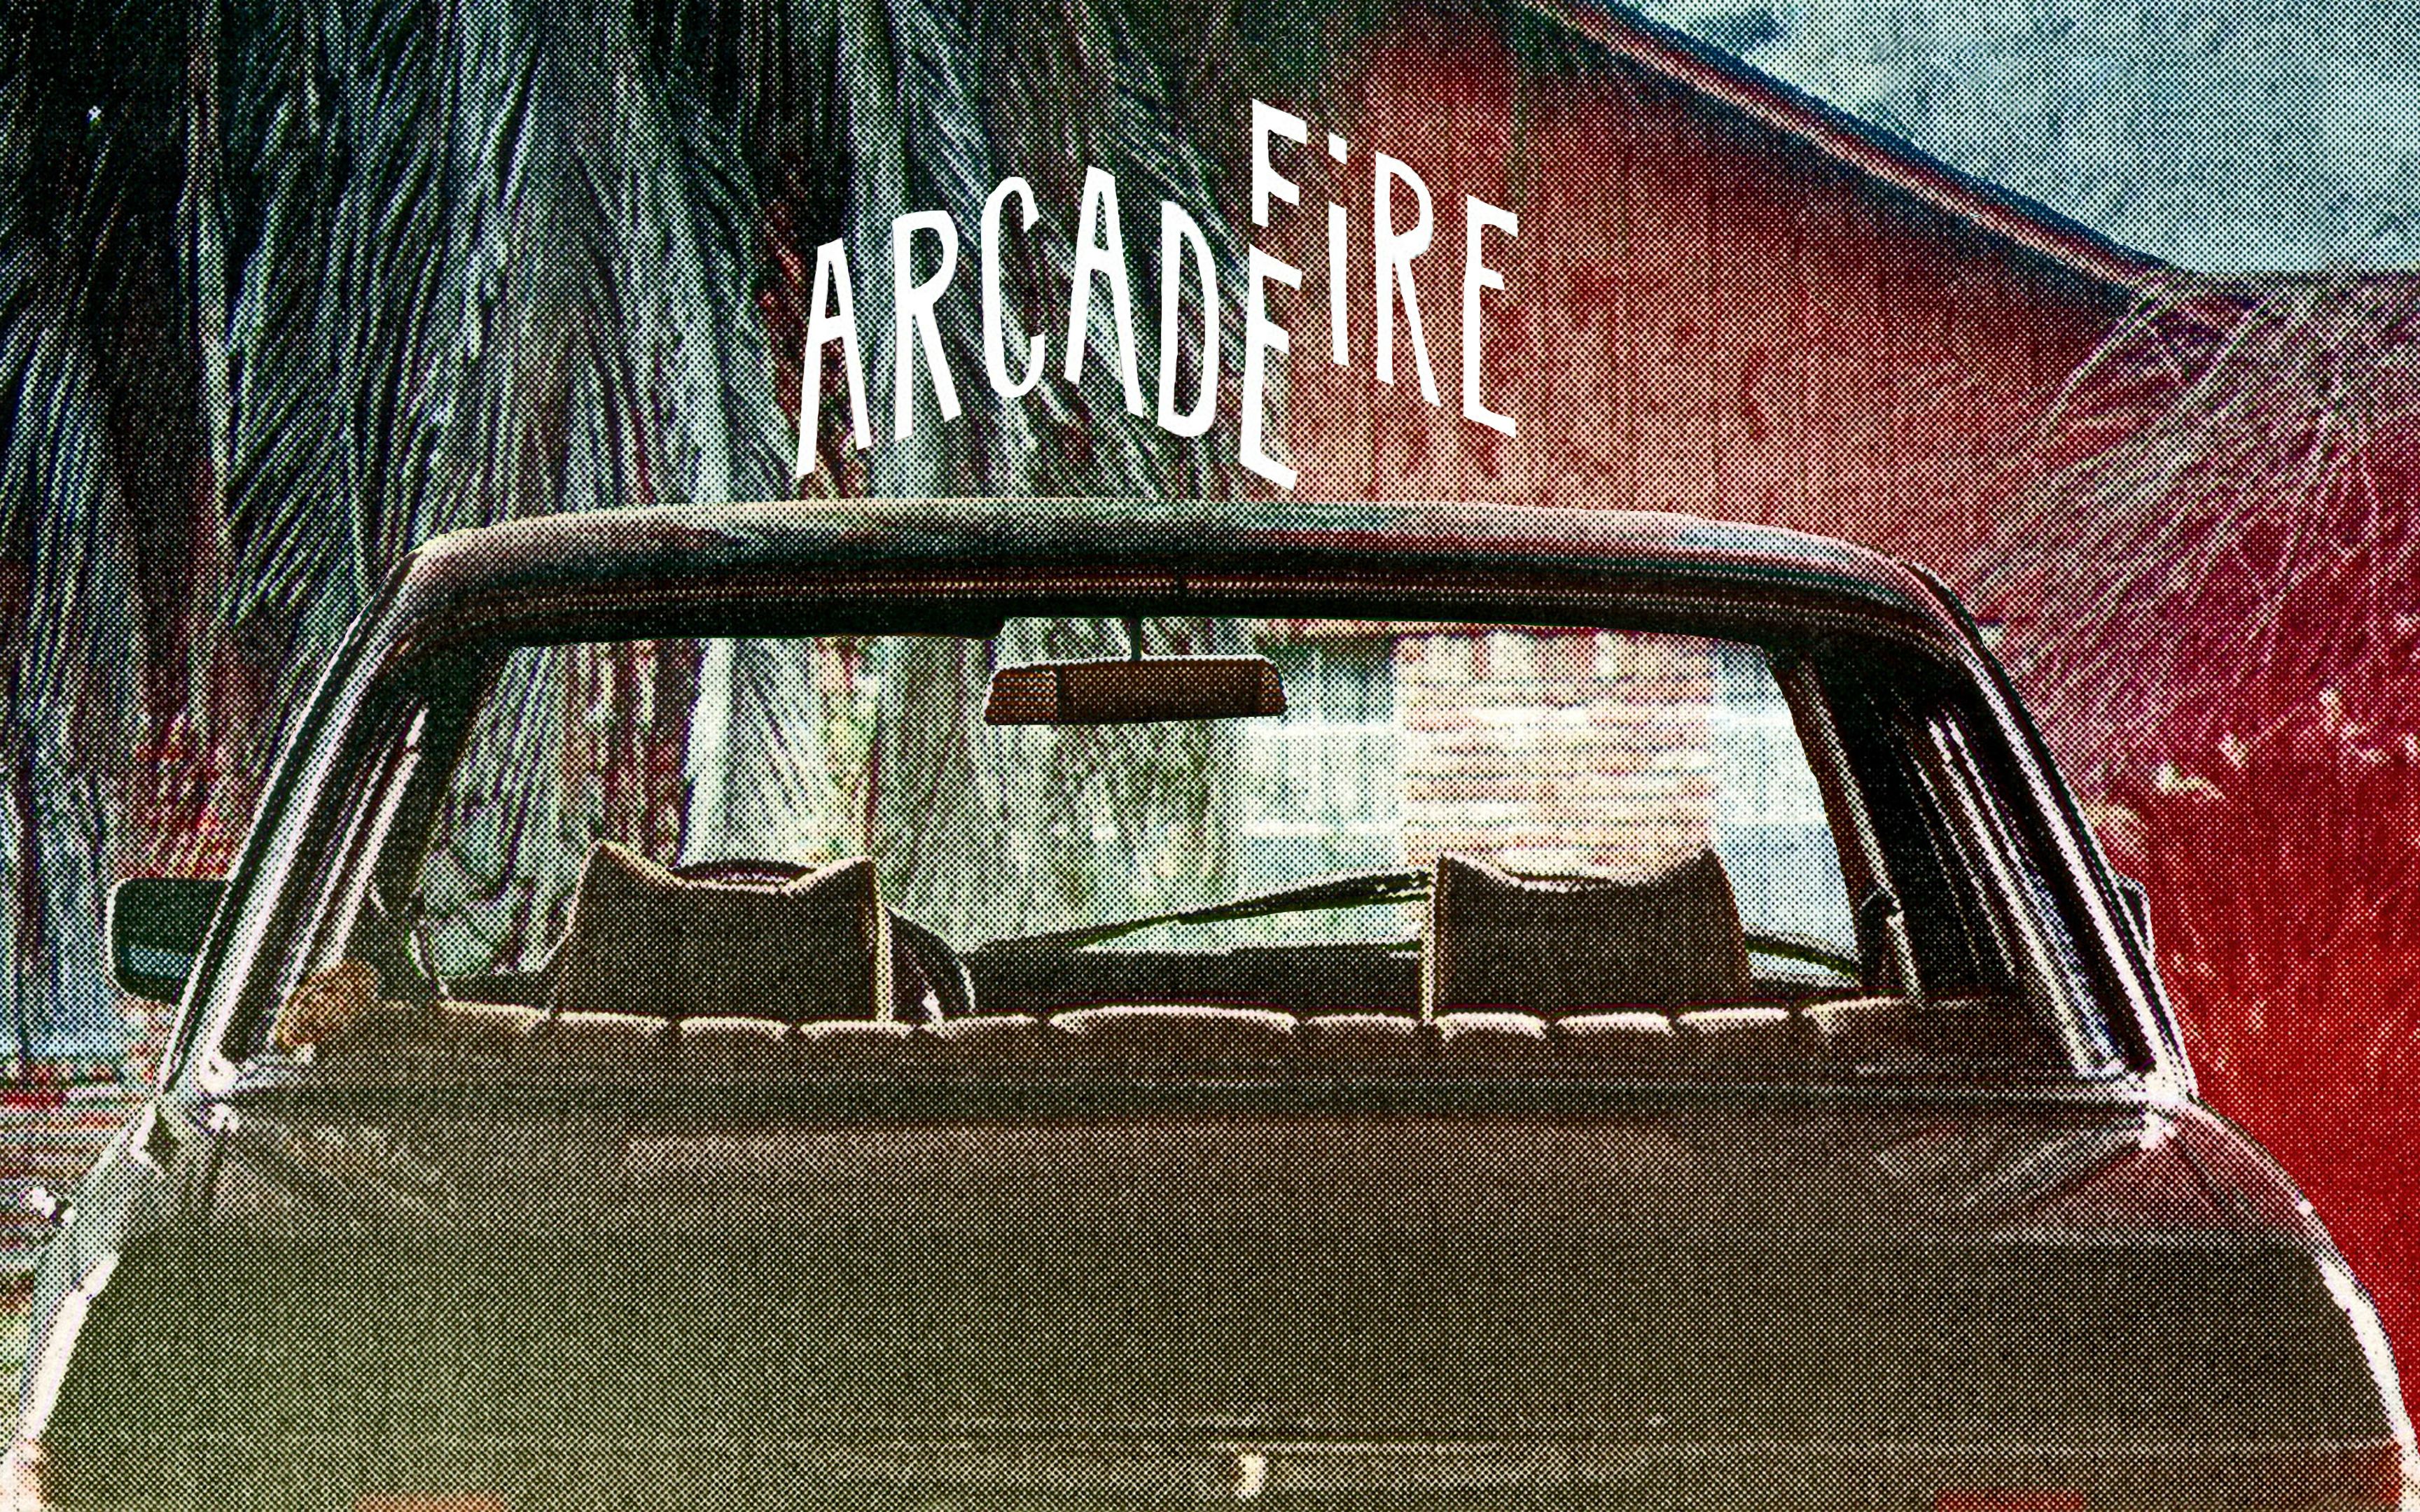 Hey / r / arcadefire Im looking for a high resolution wallpaper of